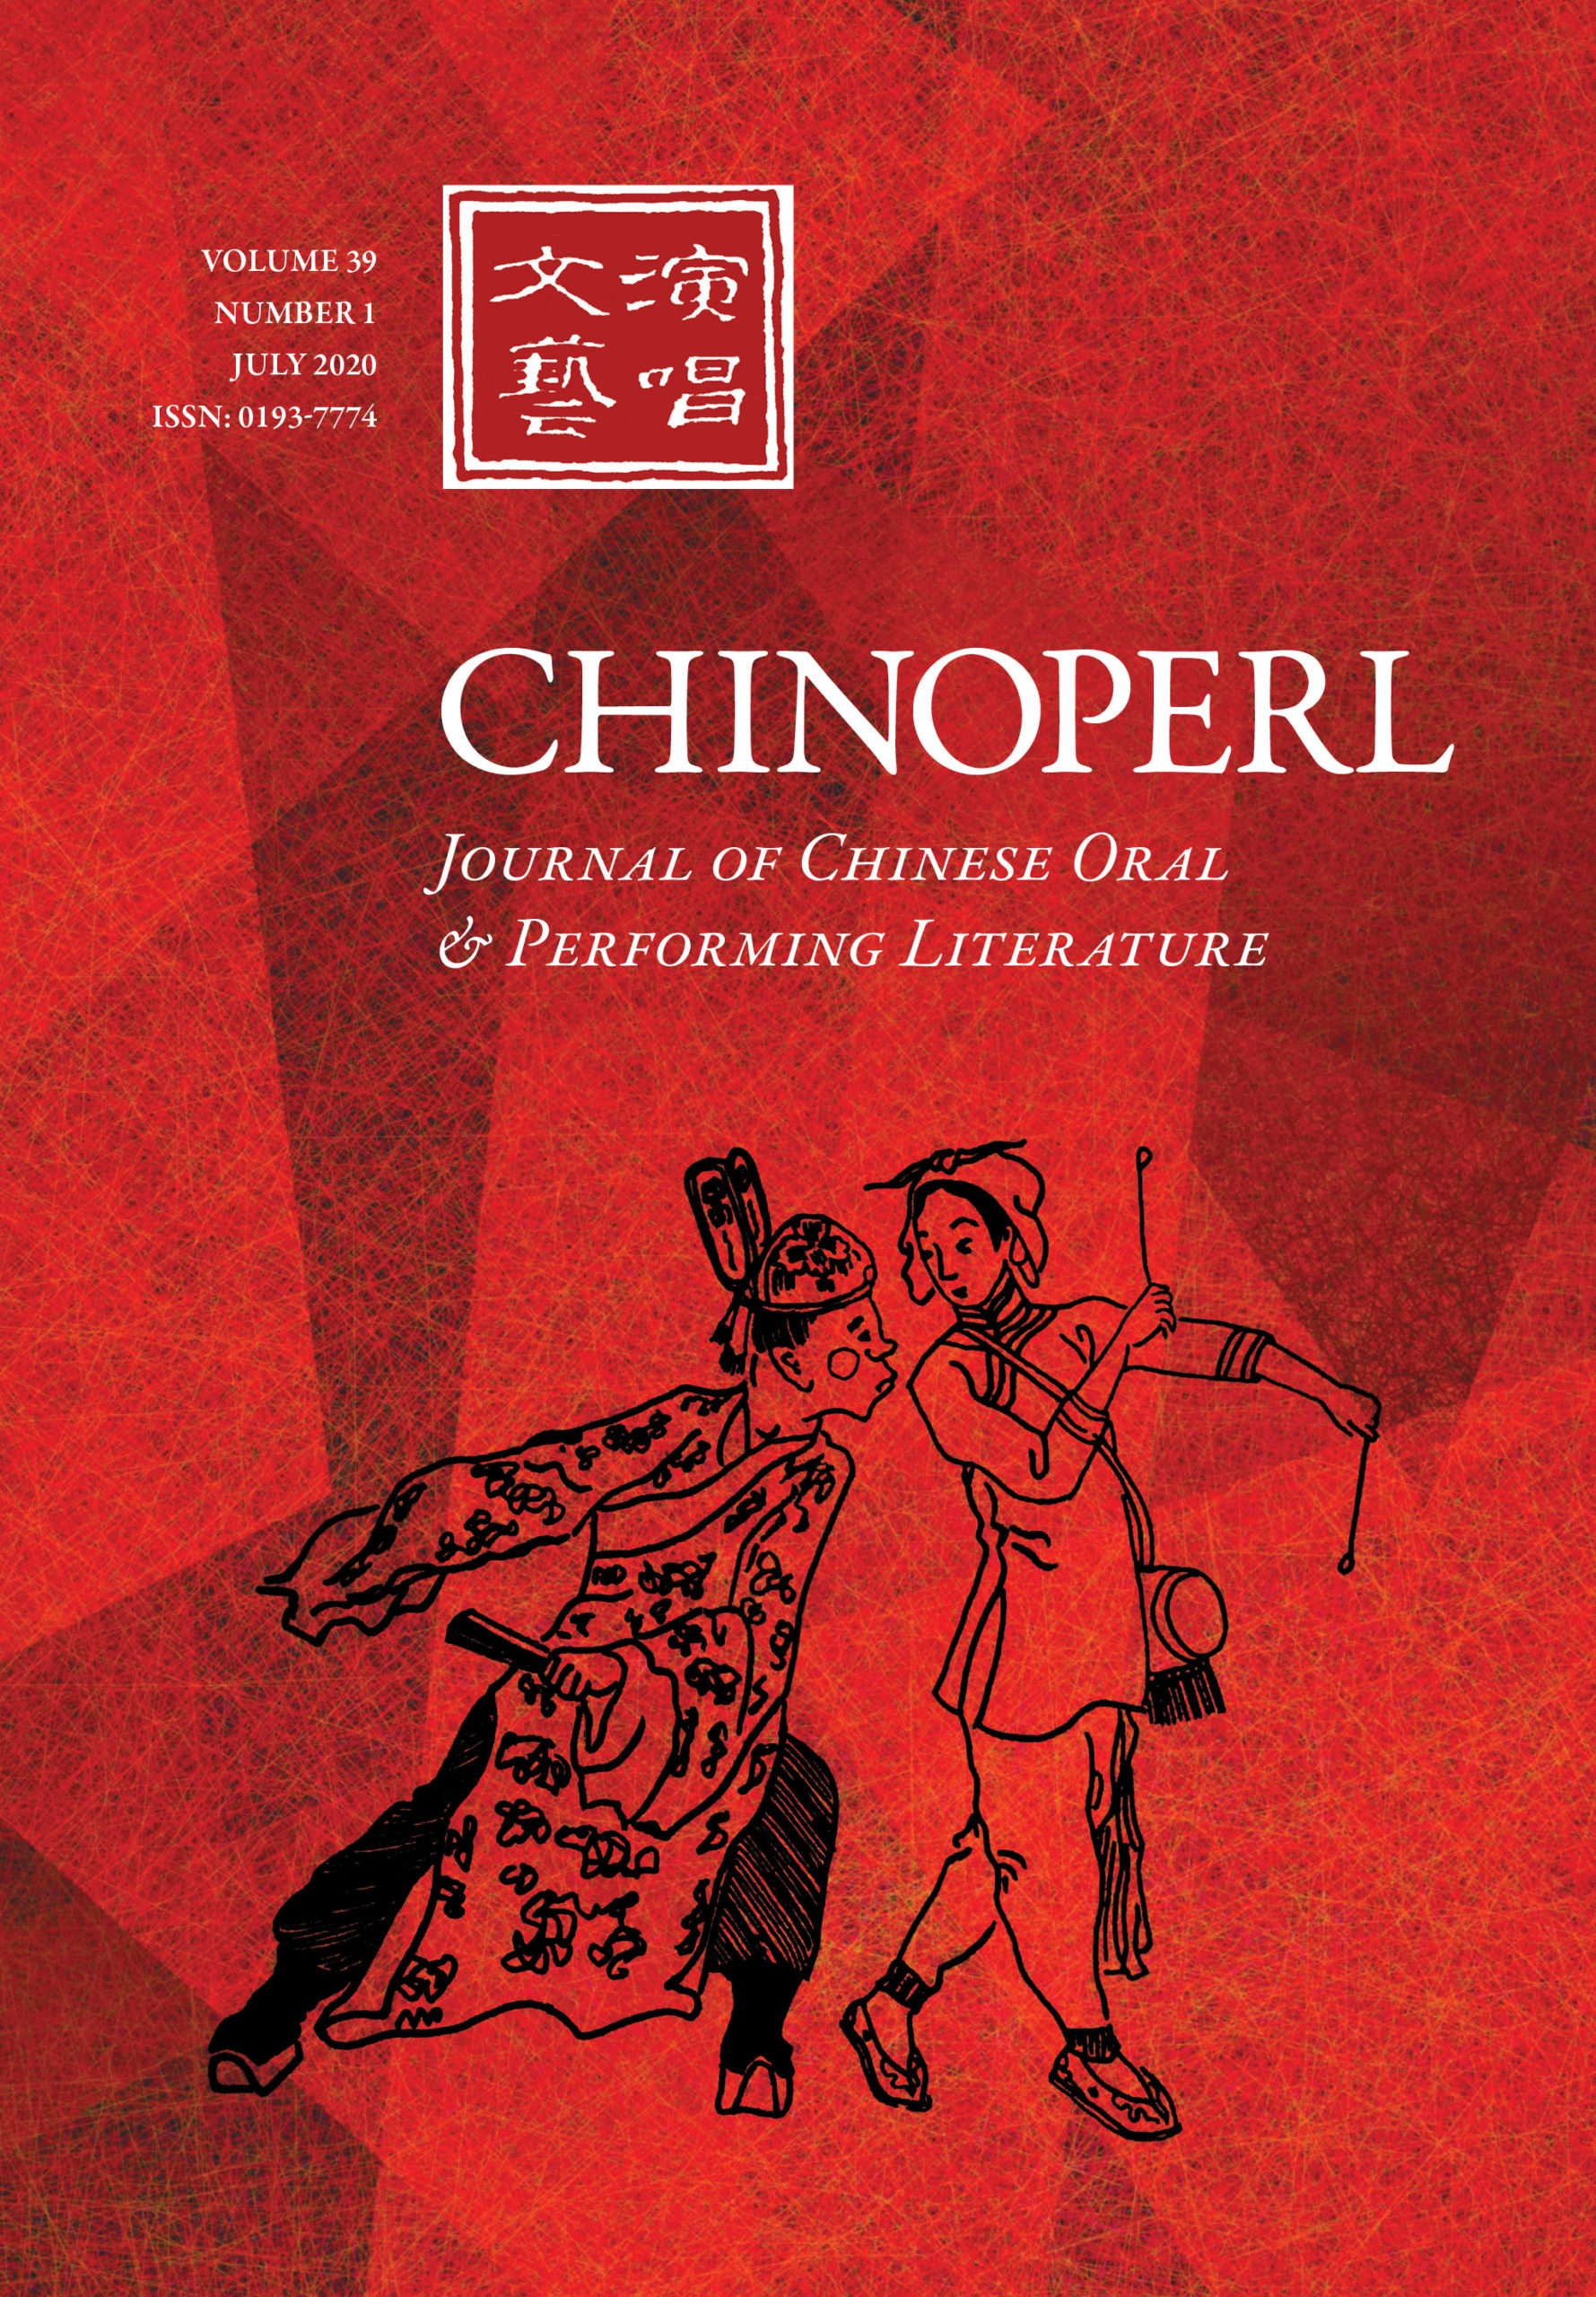 University of Hawai‘i Press to Publish CHINOPERL: Journal of Chinese Oral & Performing Literature